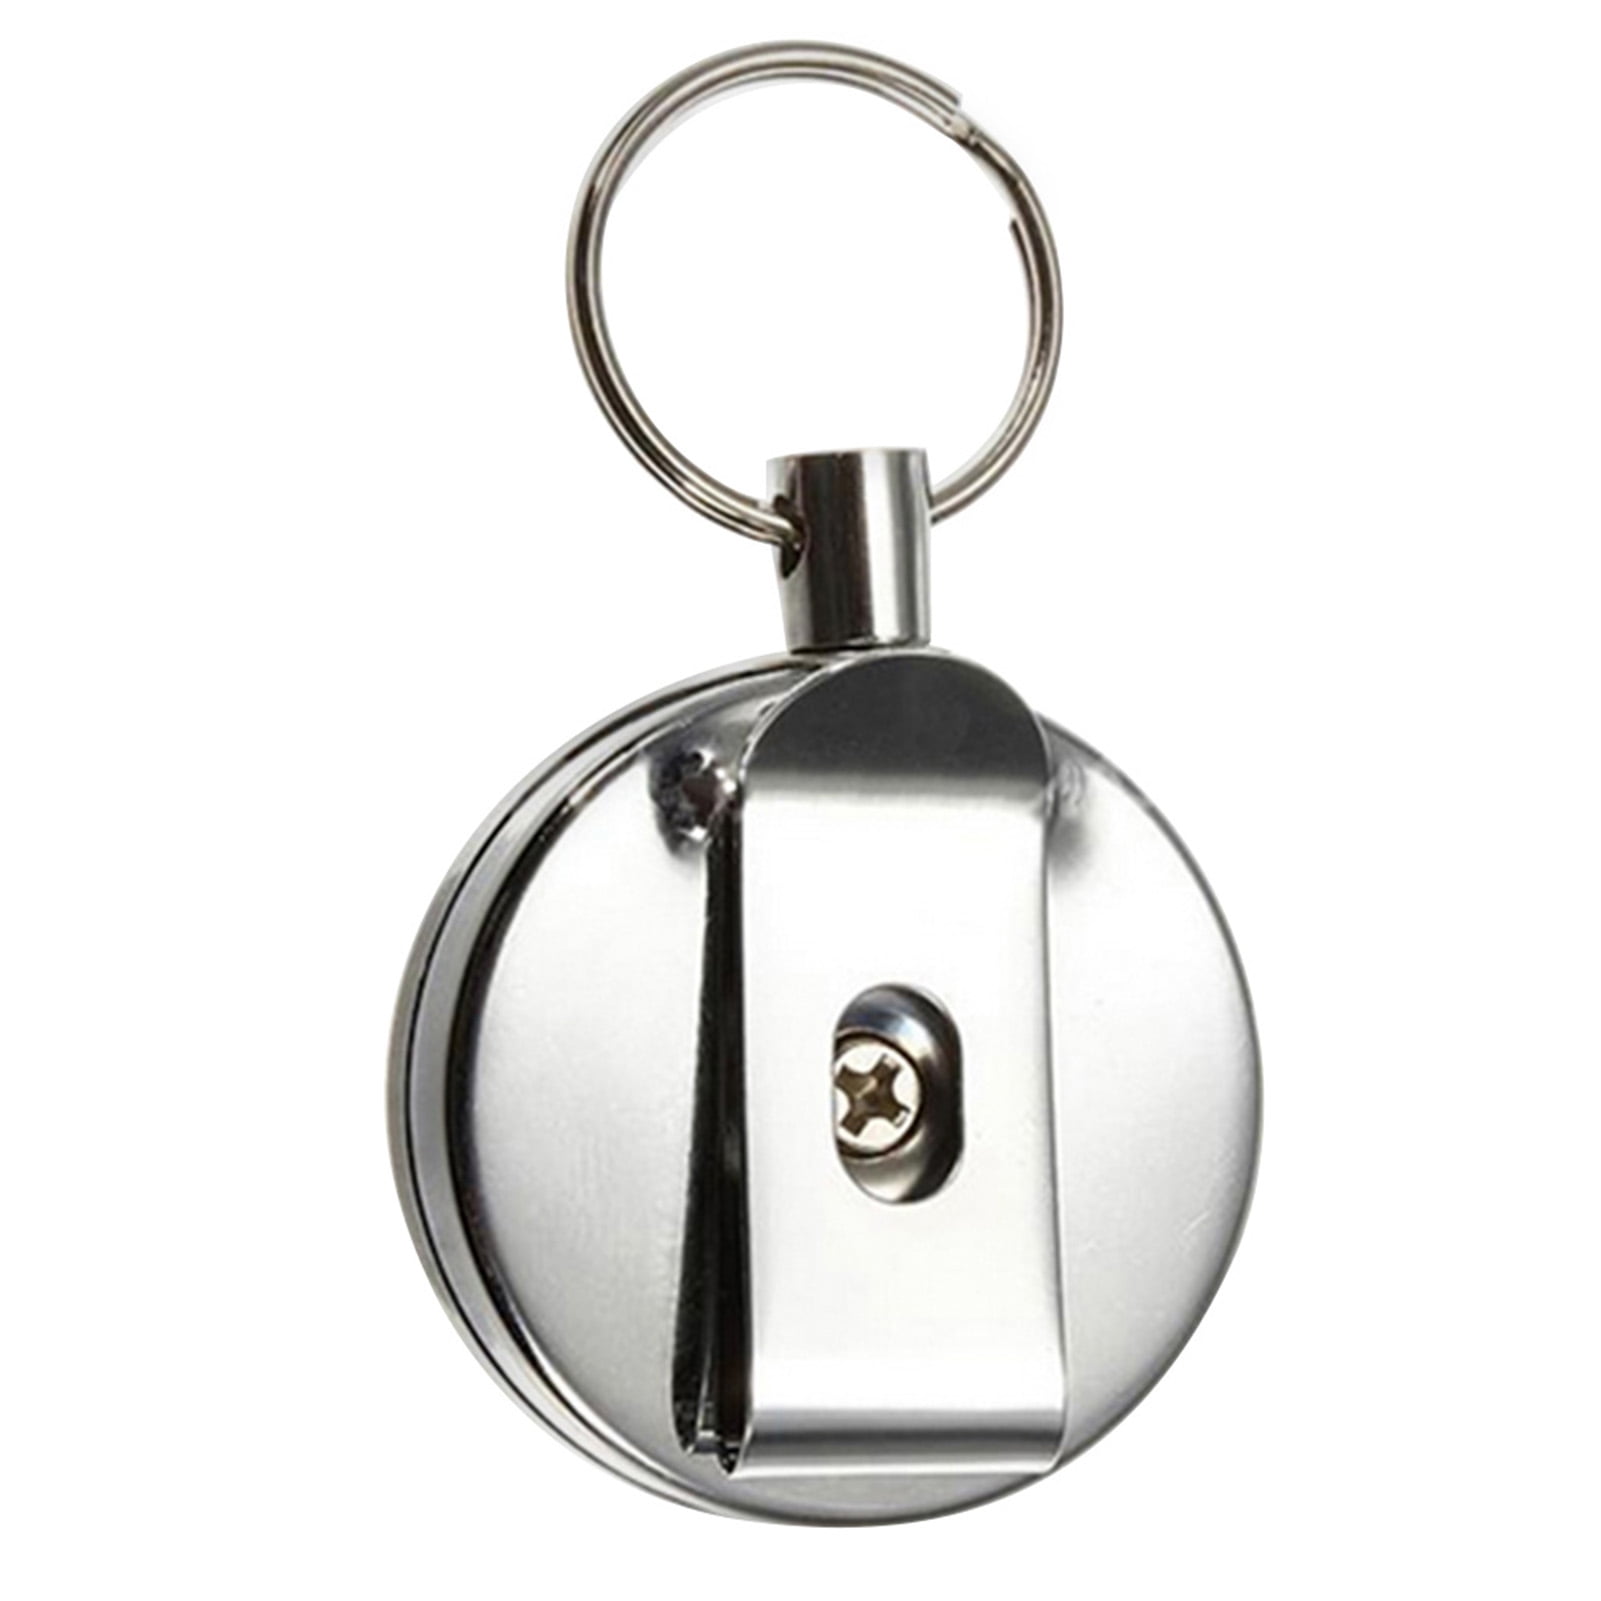 Retractable Key Chain Key Card Badge Holder Steel Recoil Ring Pull Belt Clip 